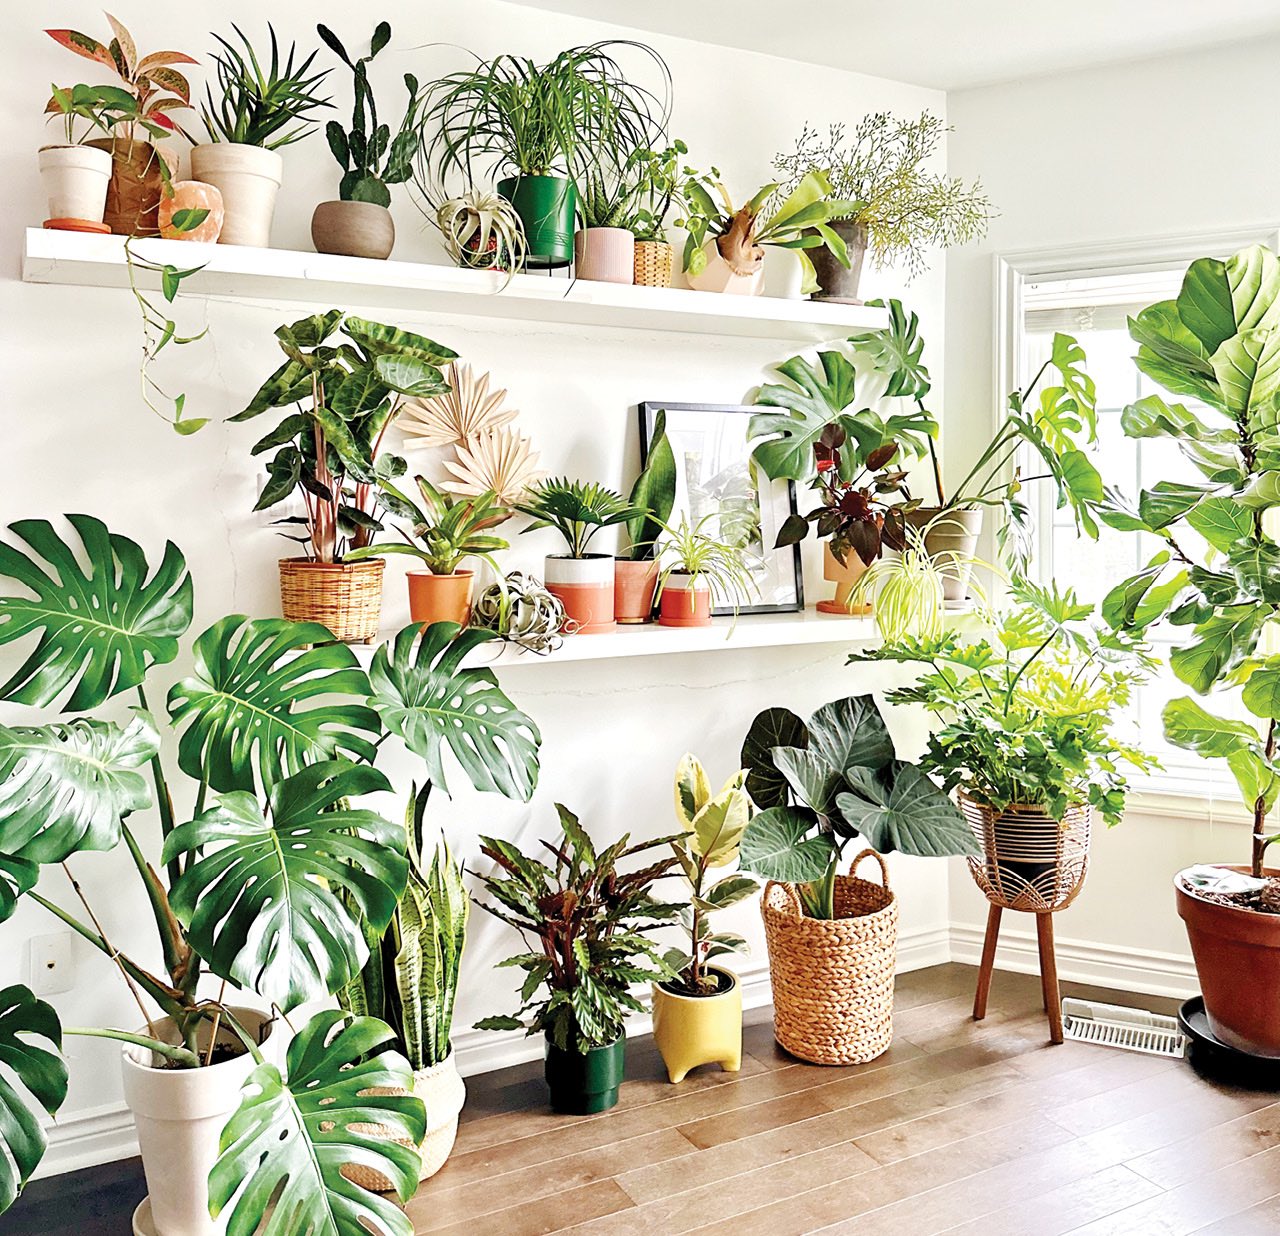 An array of indoor houseplants on three levels, two on shelves and one on the floor, in a variety of colourful pots inside